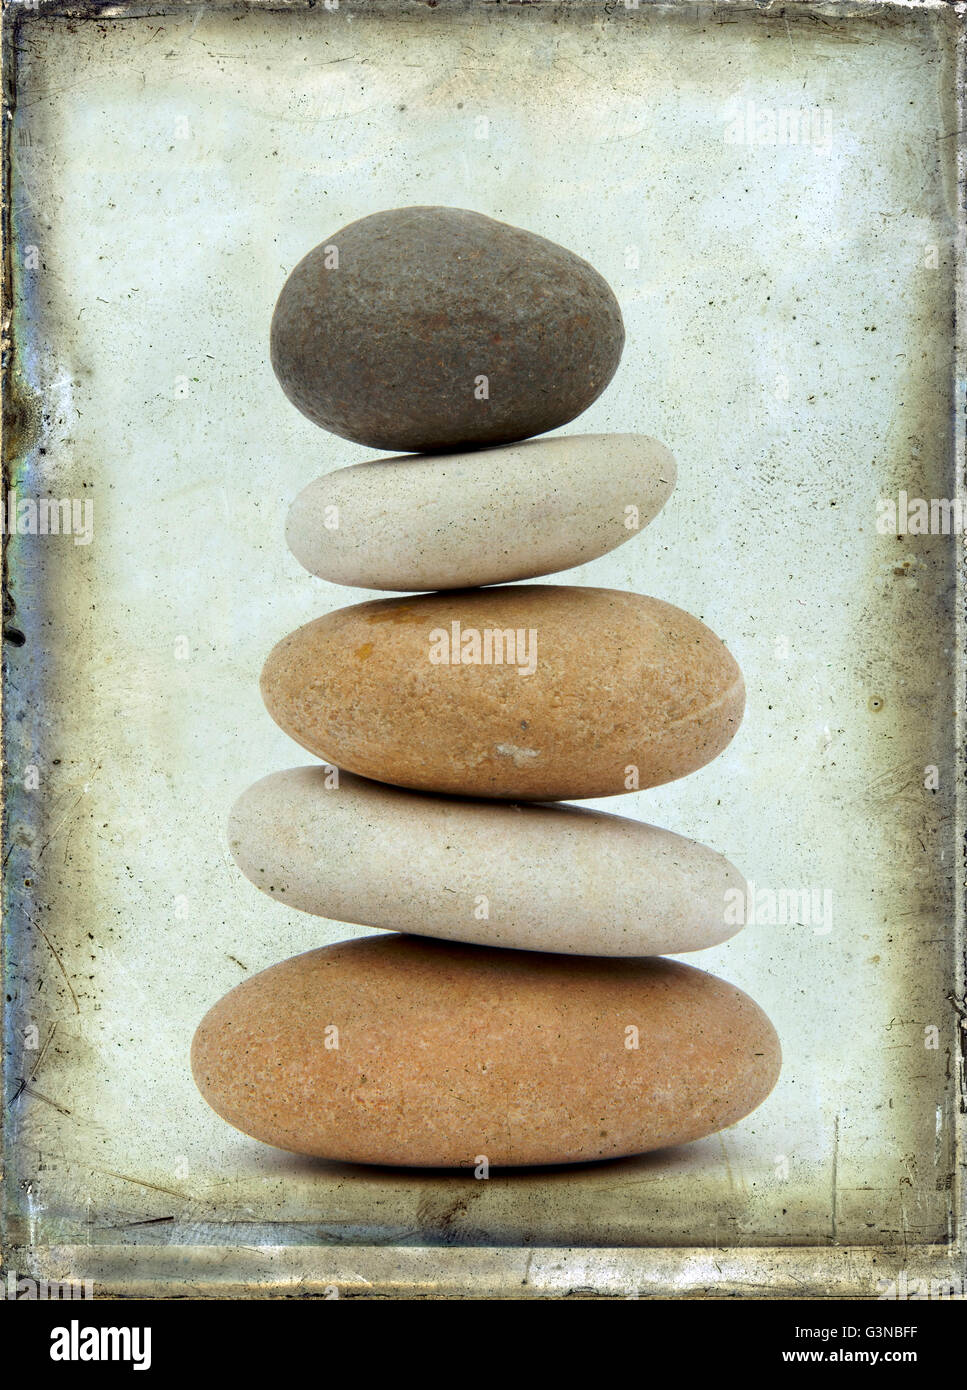 Stacked pebbles, vintage look Stock Photo